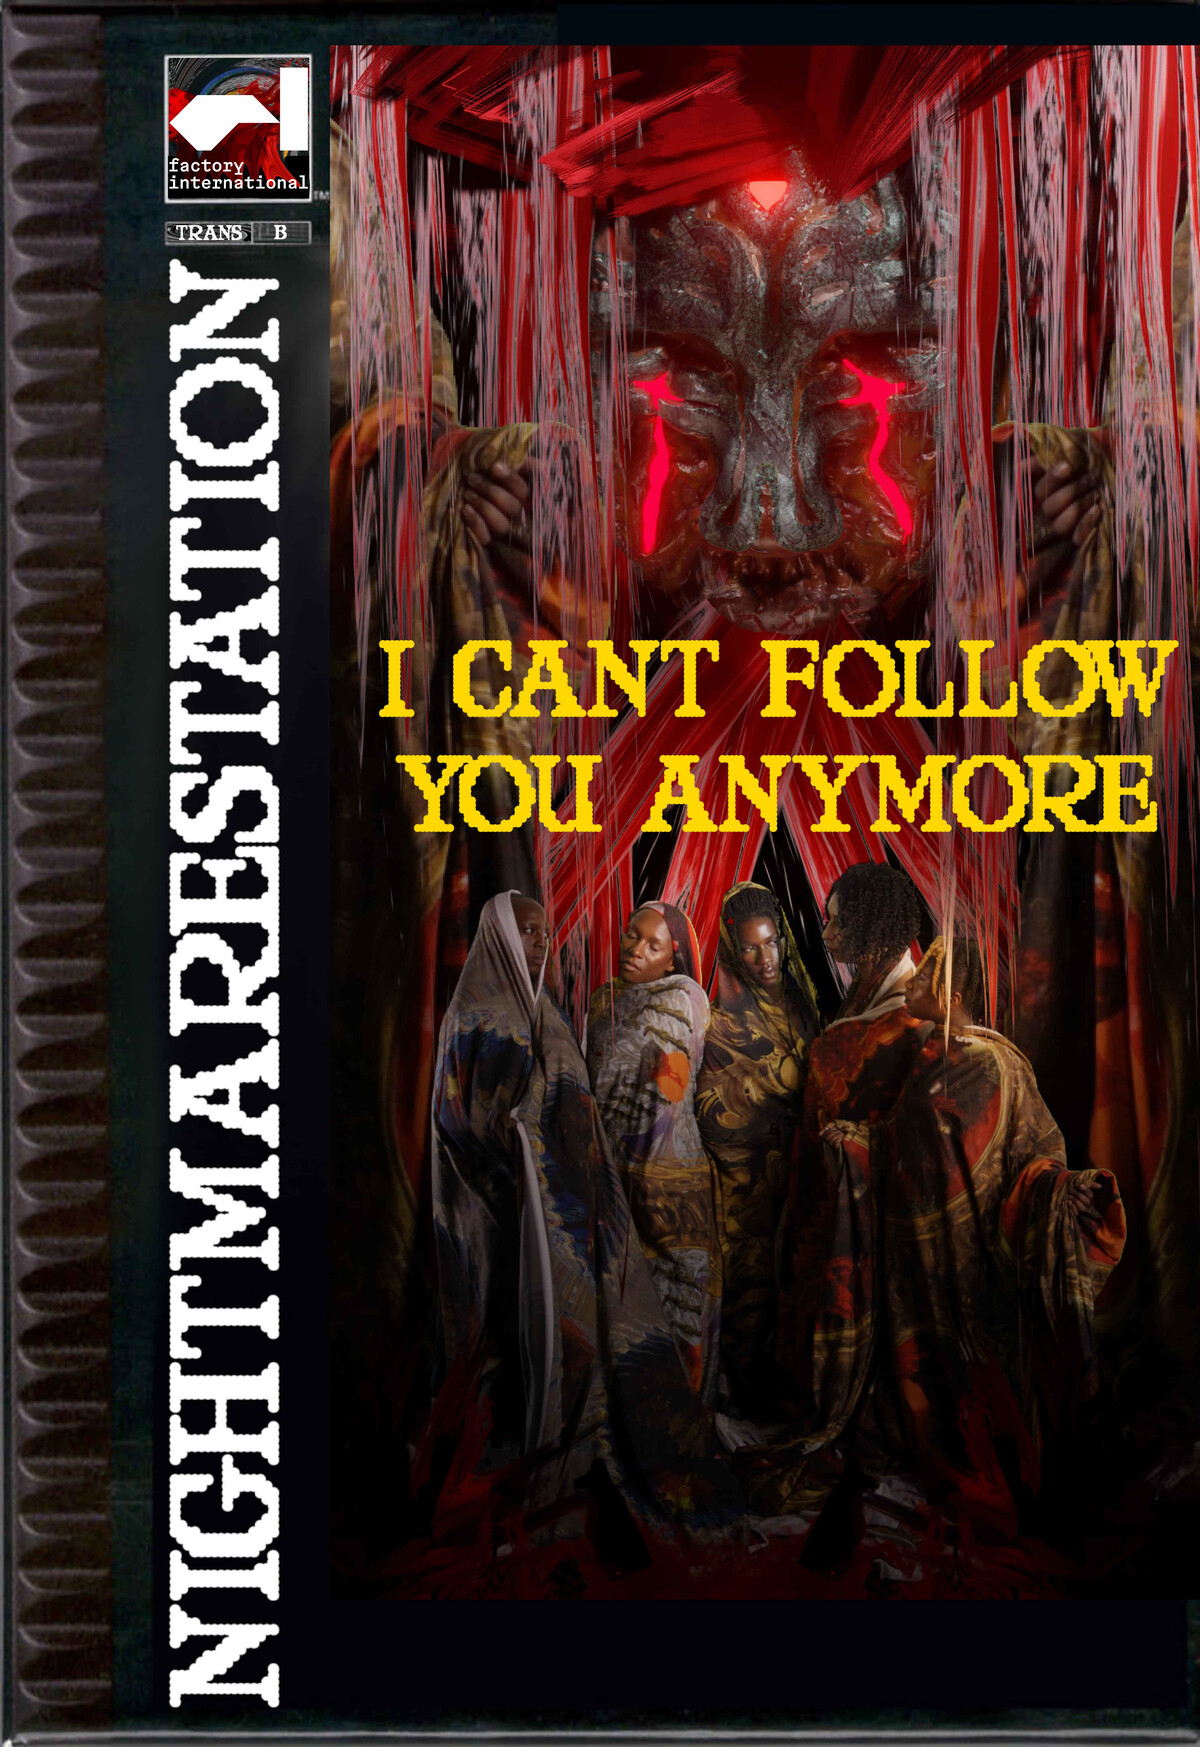 A digital image featuring photos of four people shrouded in cloaks with the text NIGHTMARESTATION AN I CAN'T FOLLOW YOU ANYMORE